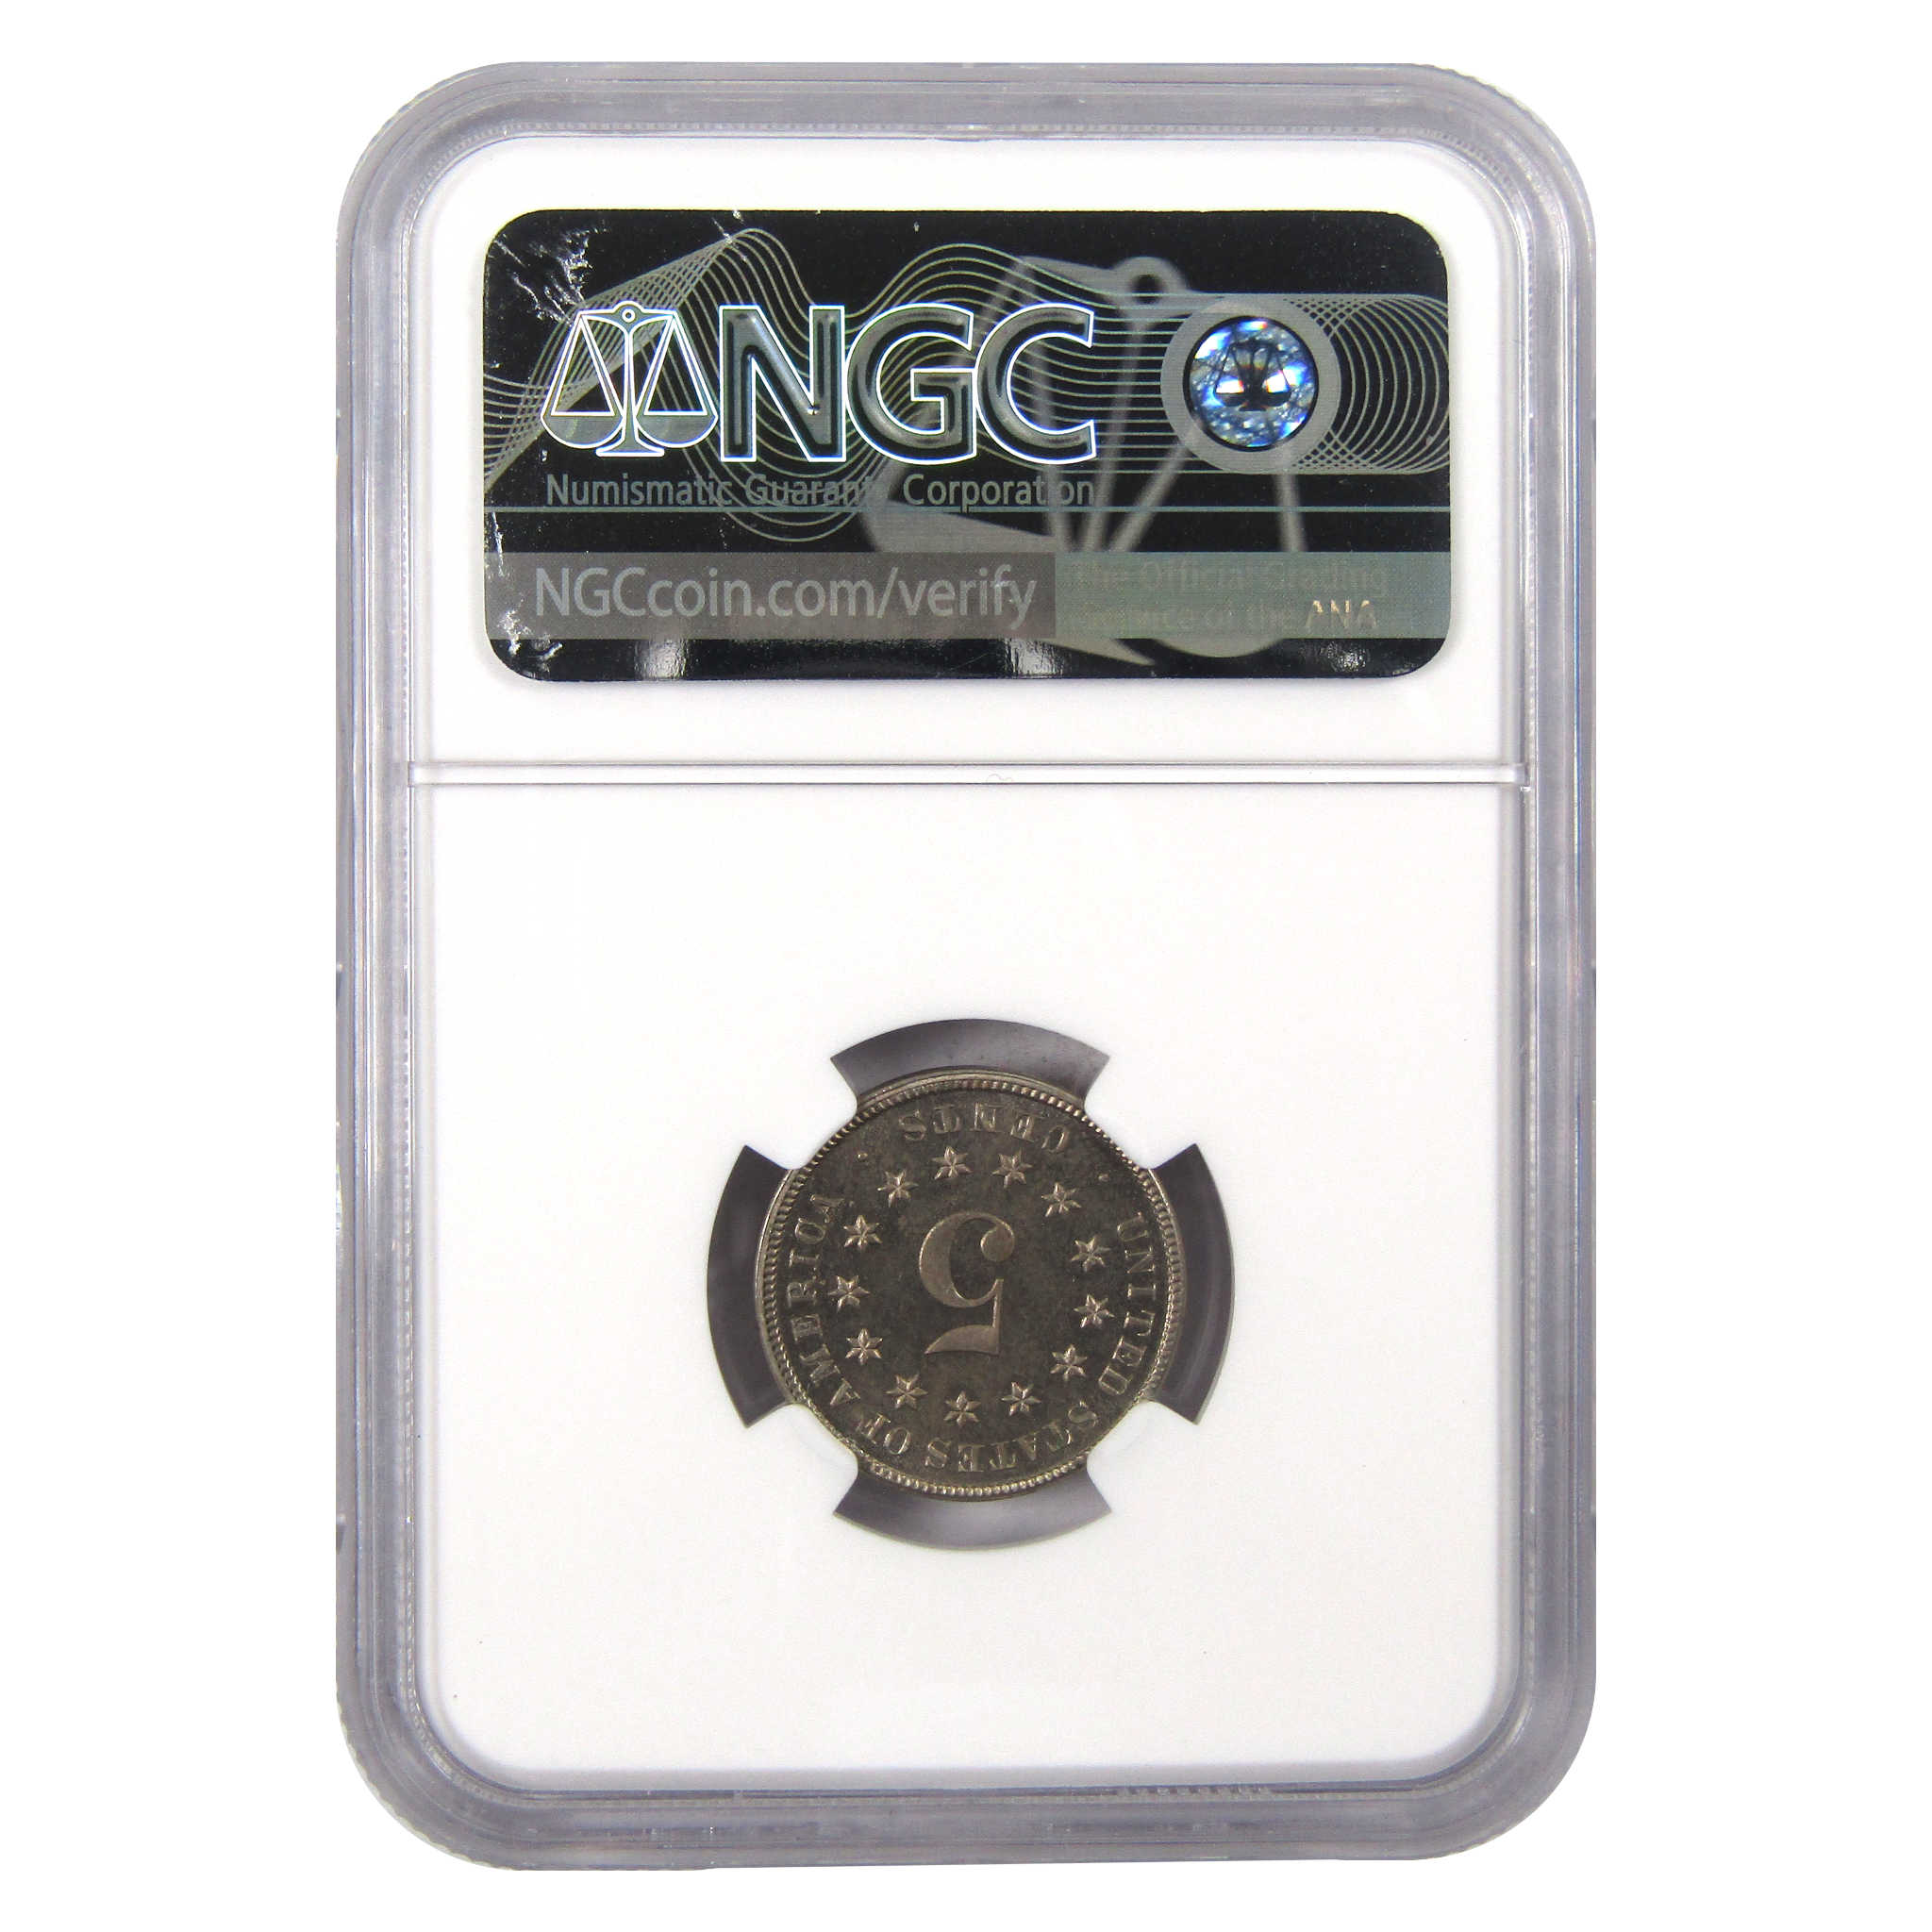 1883 With Cents Shield Nickel PF 64 NGC 5c Proof Coin SKU:I9765